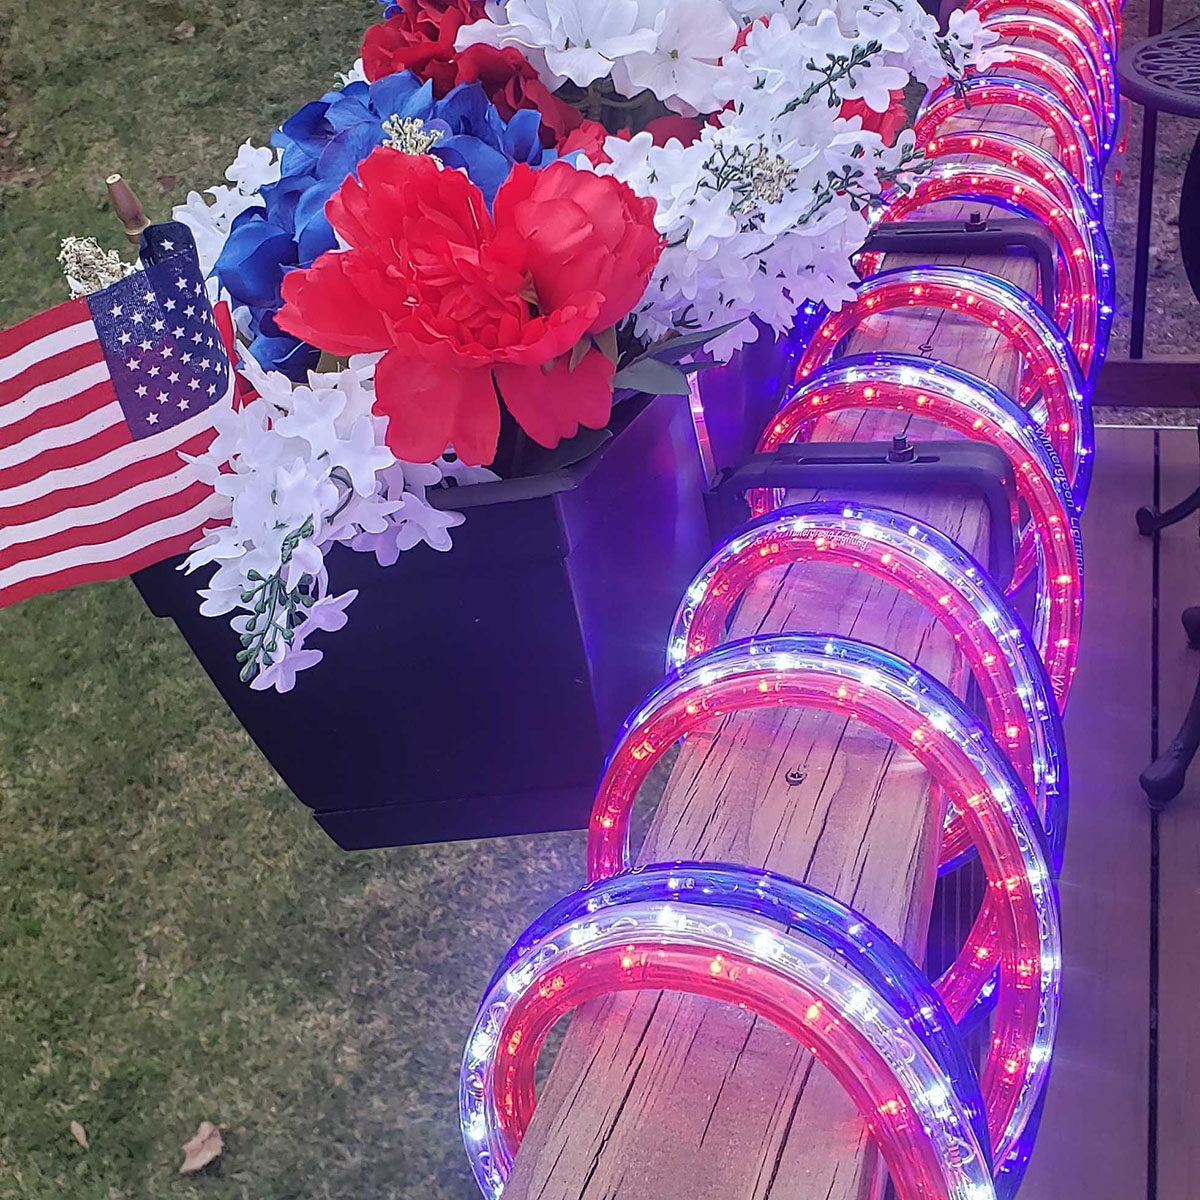 Red, White & Blue Rope Lights Wrapped Around Deck Railings